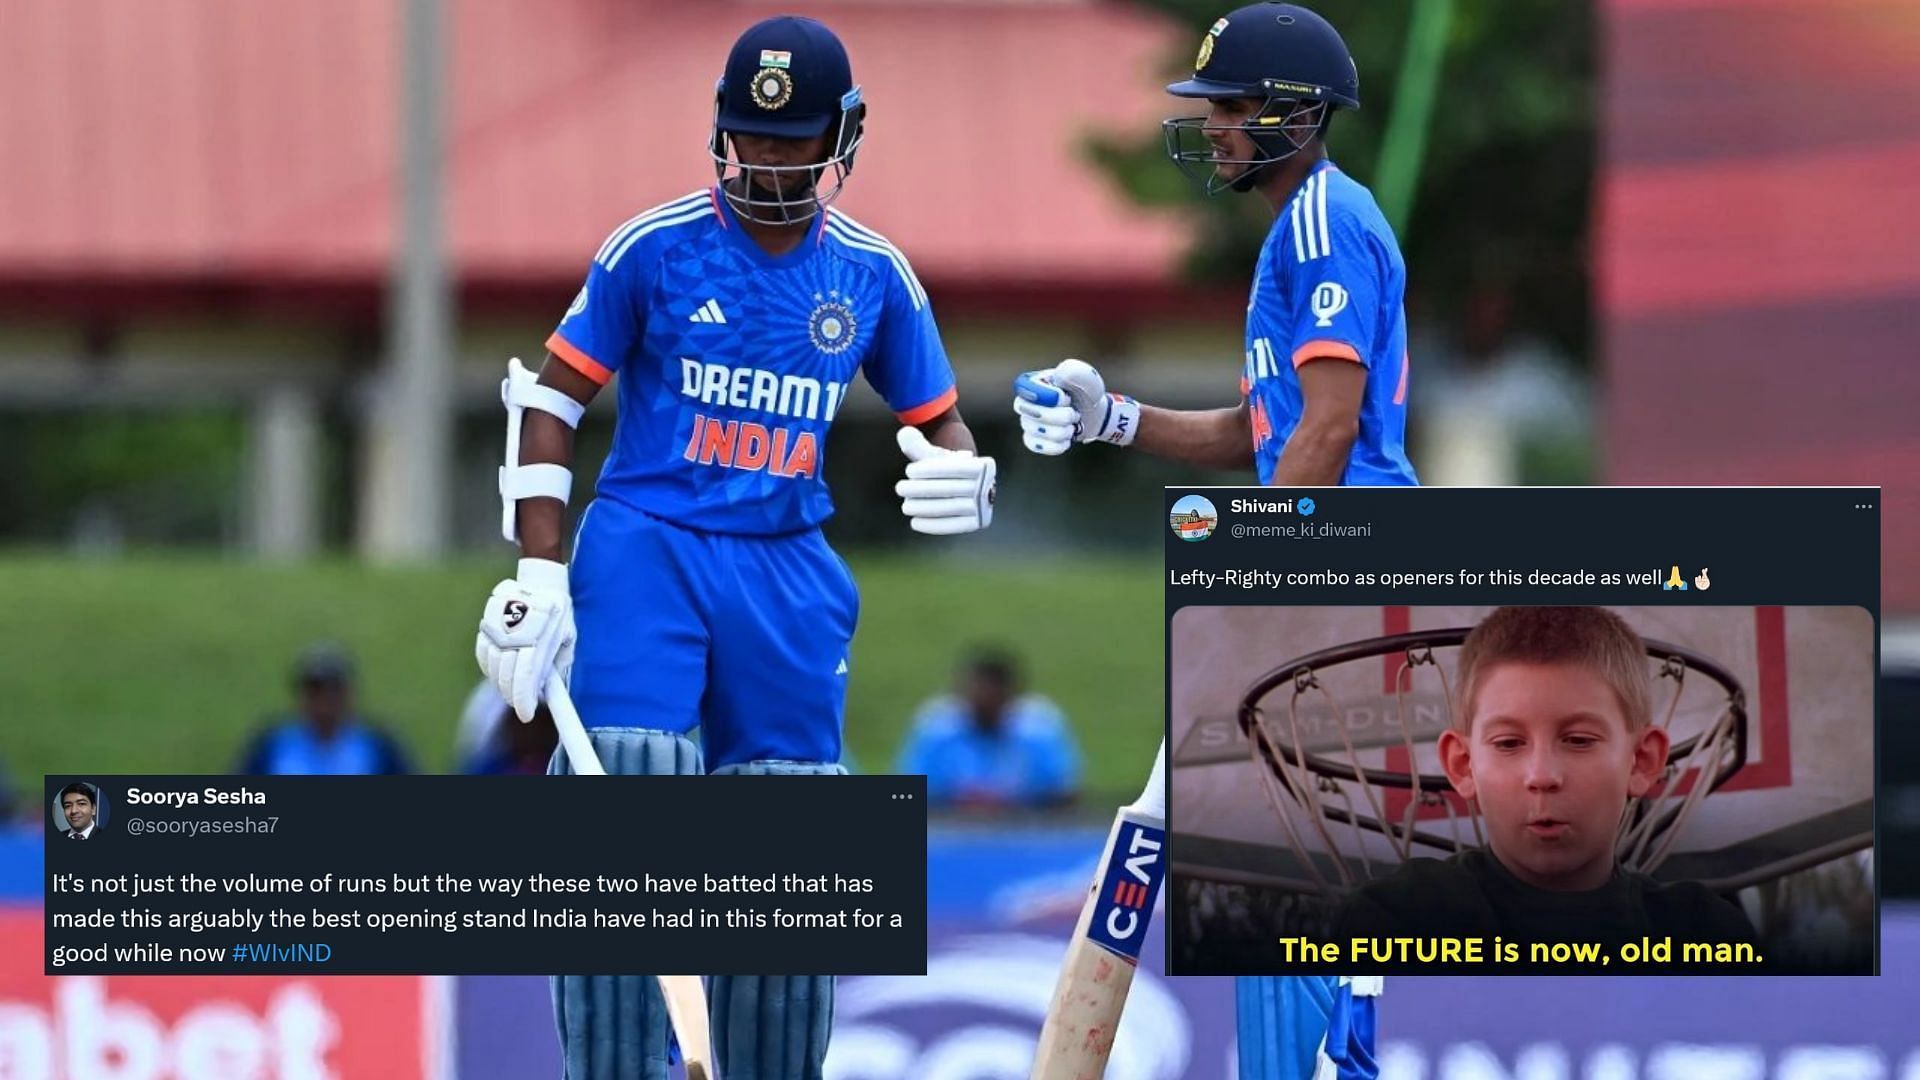 Fans believe Yashasvi Jaiswal and Shubman Gill is an outstanding opening pair for the future (P.C&gt;:Twitter)